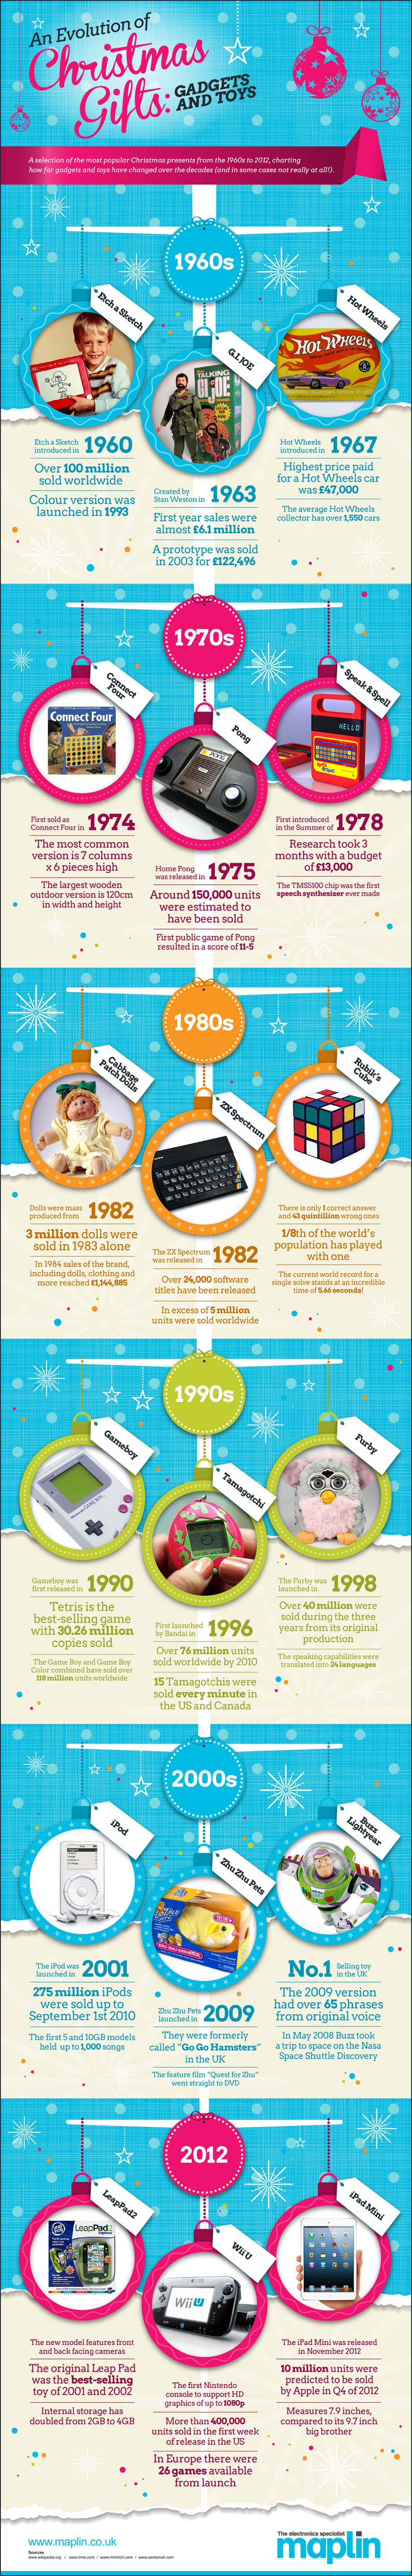 10 evolution-of-christmas-gifts-gadgets-toys